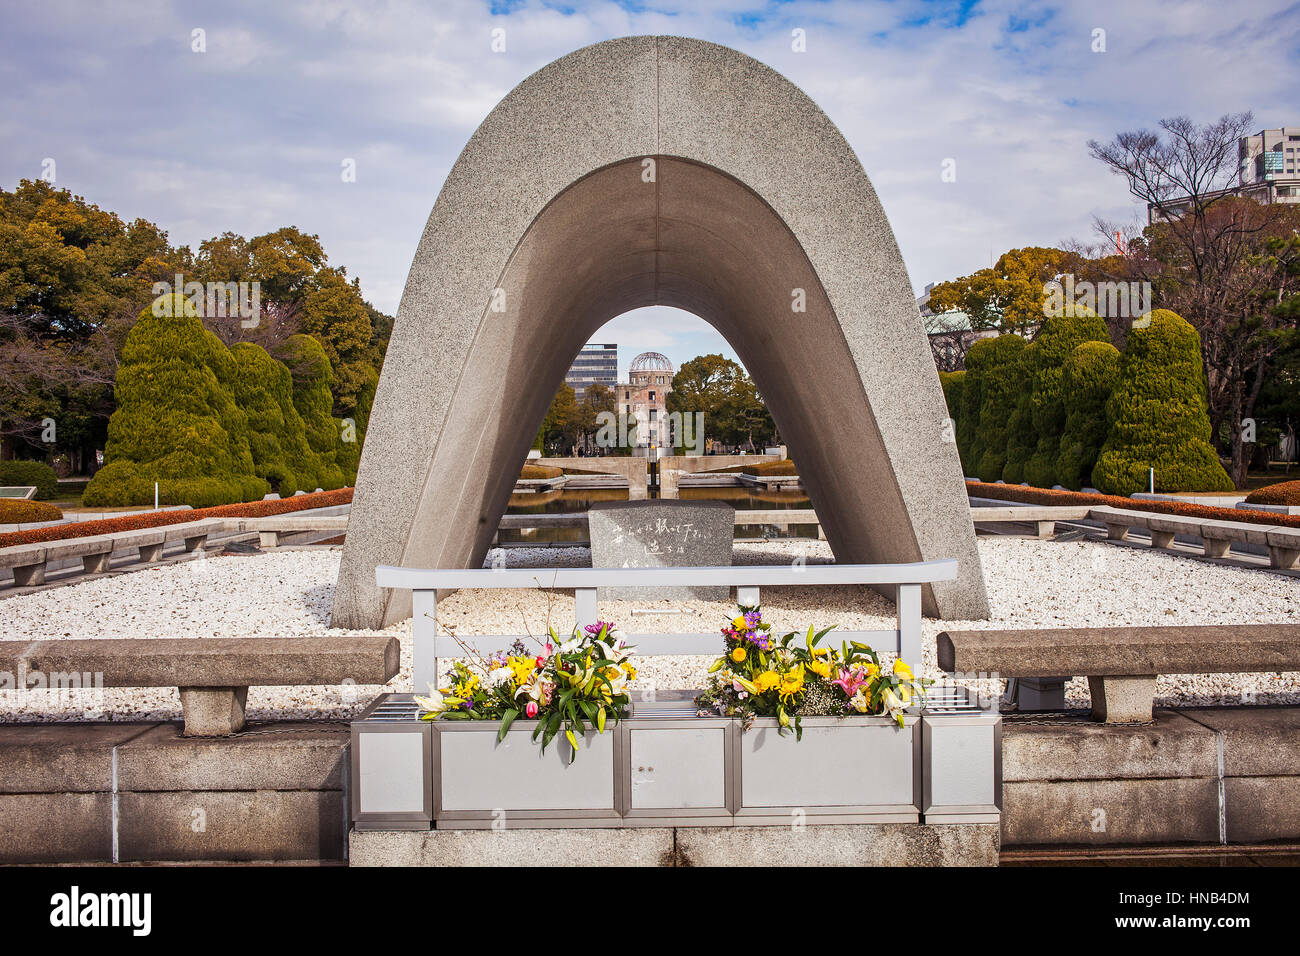 Cenotaph for the Atomic bomb victims, in background Atomic Bomb Dome, Peace Park, Hiroshima, Japan Stock Photo